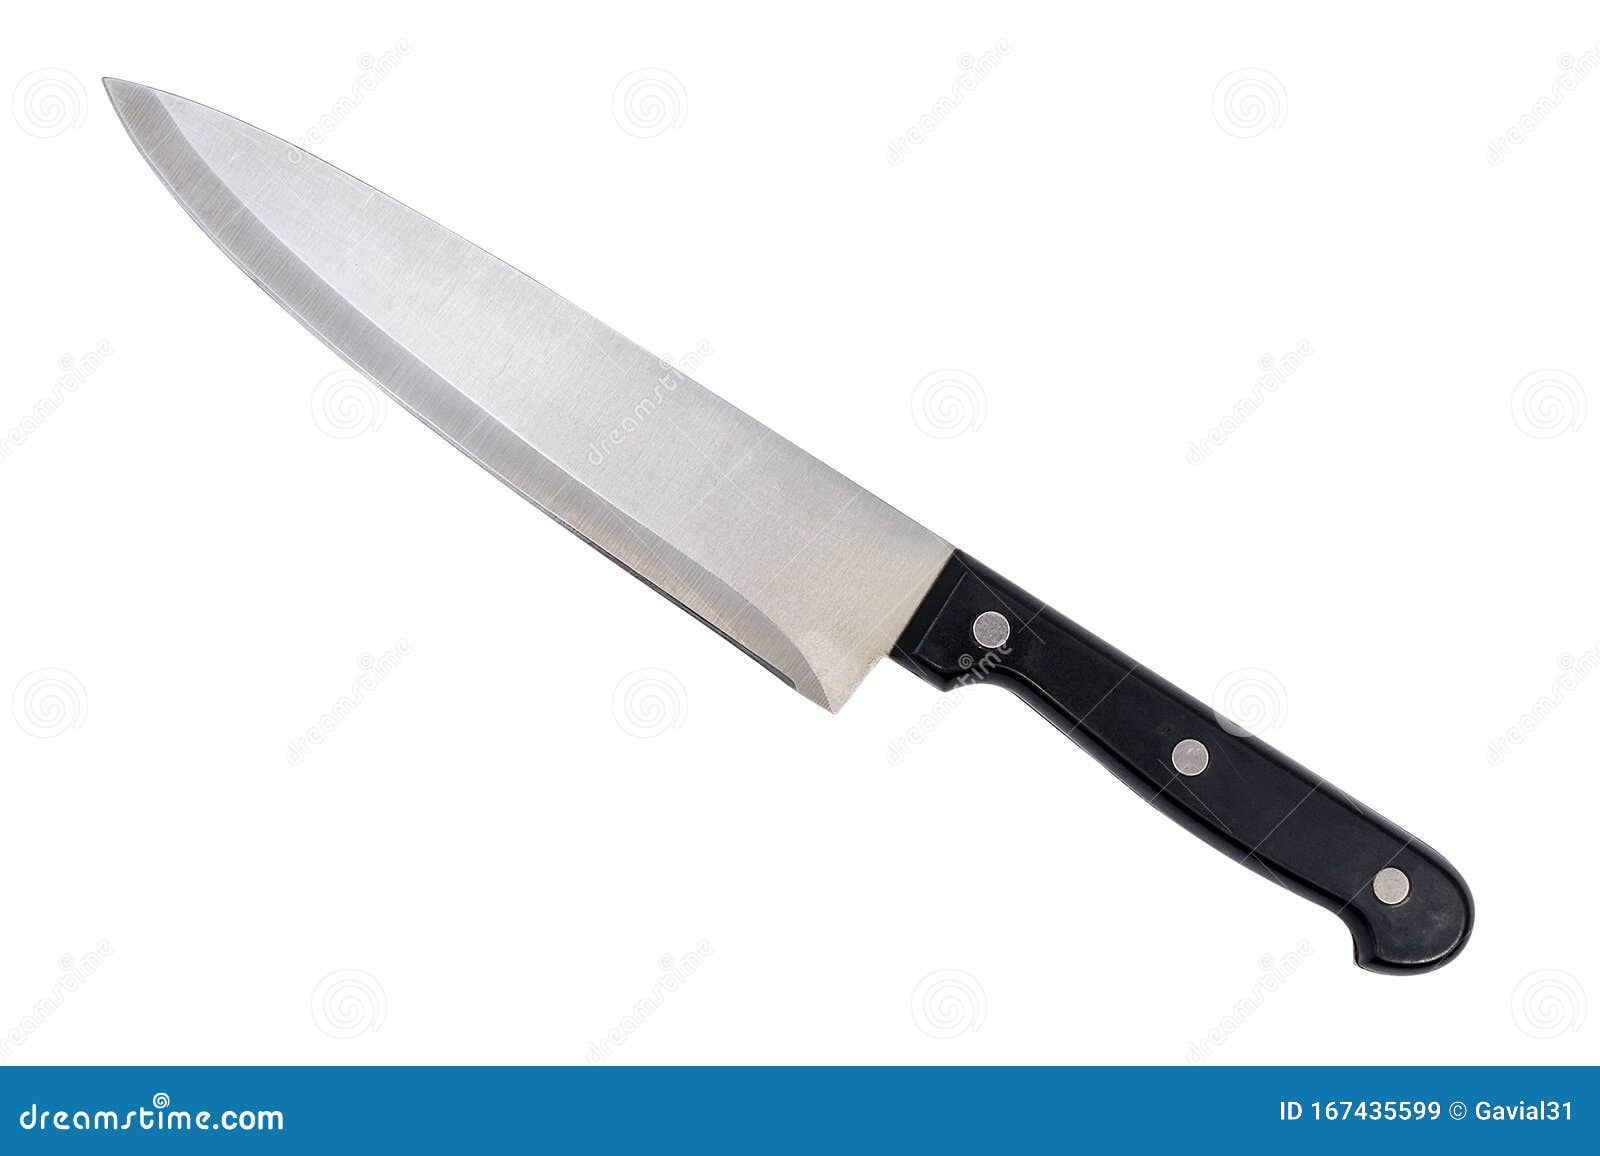 Steel Kitchen Knife Isolated on White. Object for the Project and Design  Stock Image - Image of dangerous, carving: 167435599